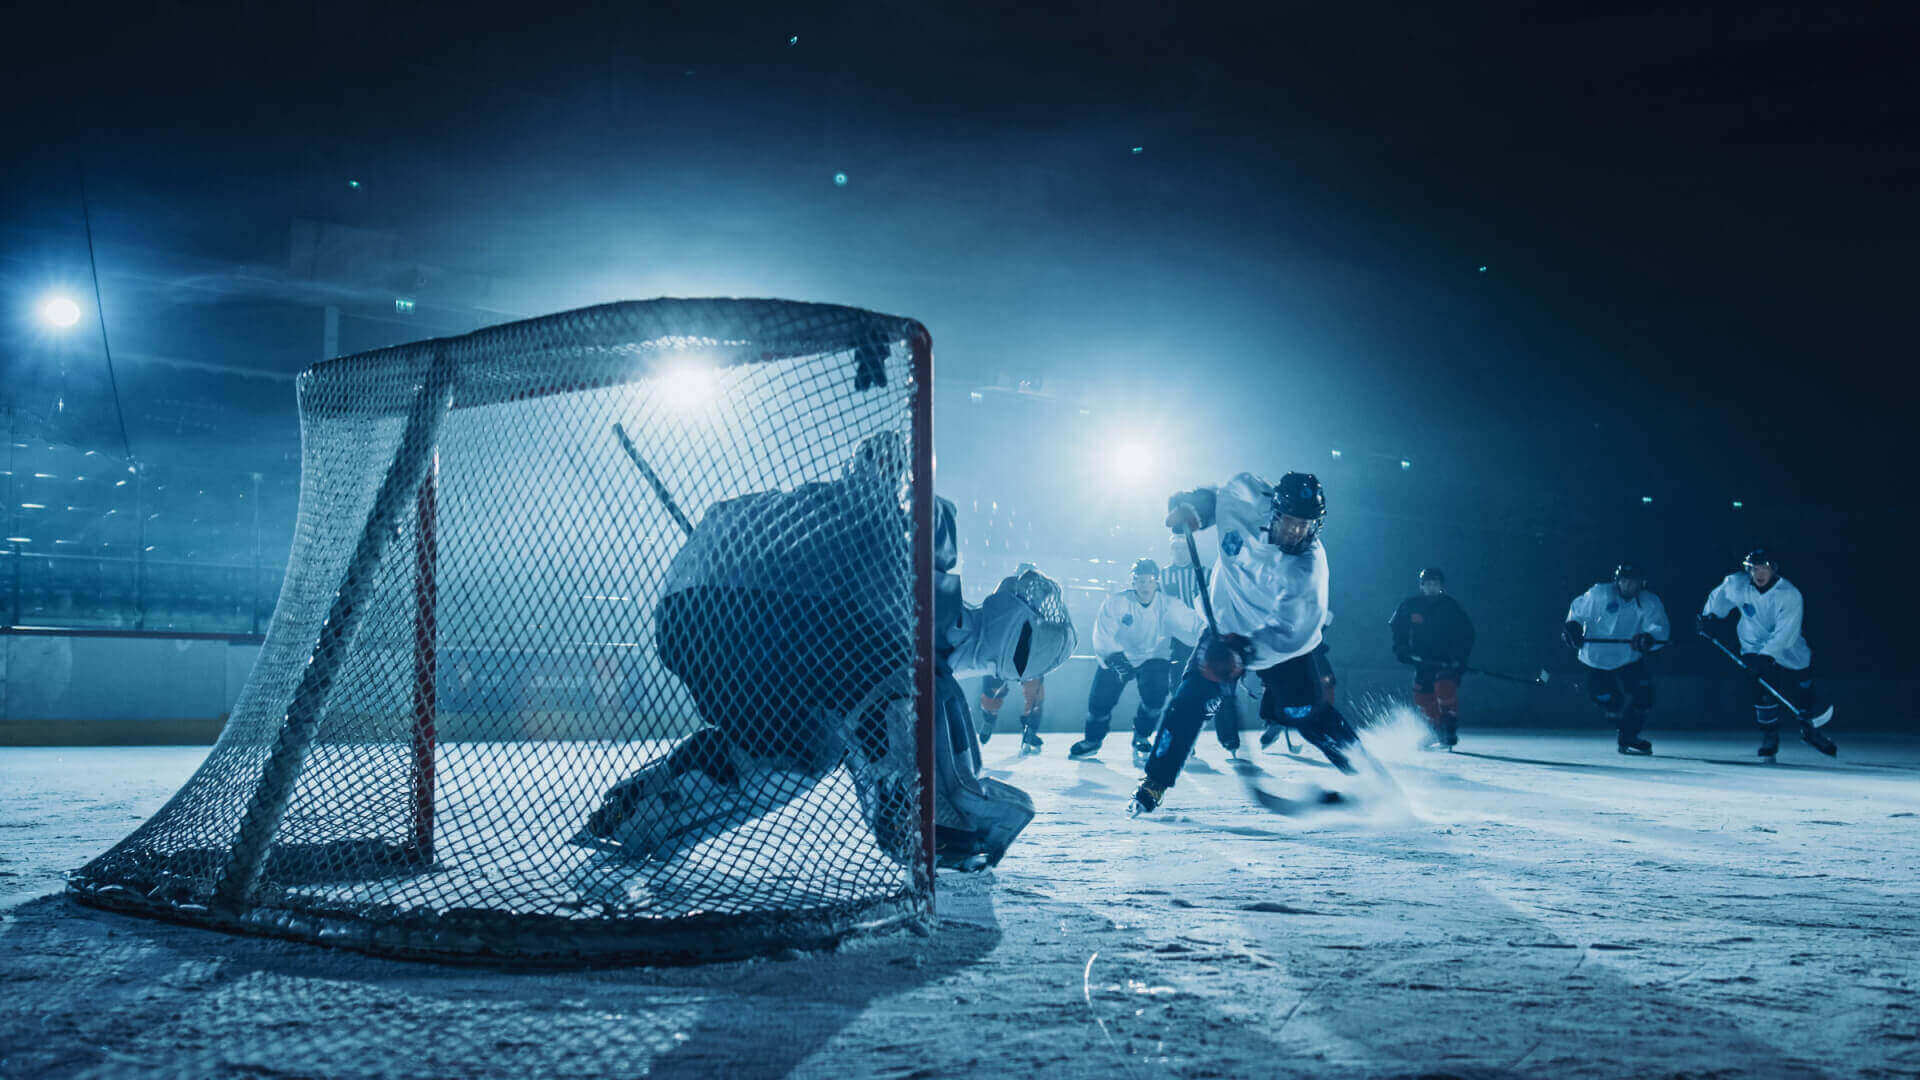 Which Shot in Ice Hockey is the Hardest for a Goalie to Stop?